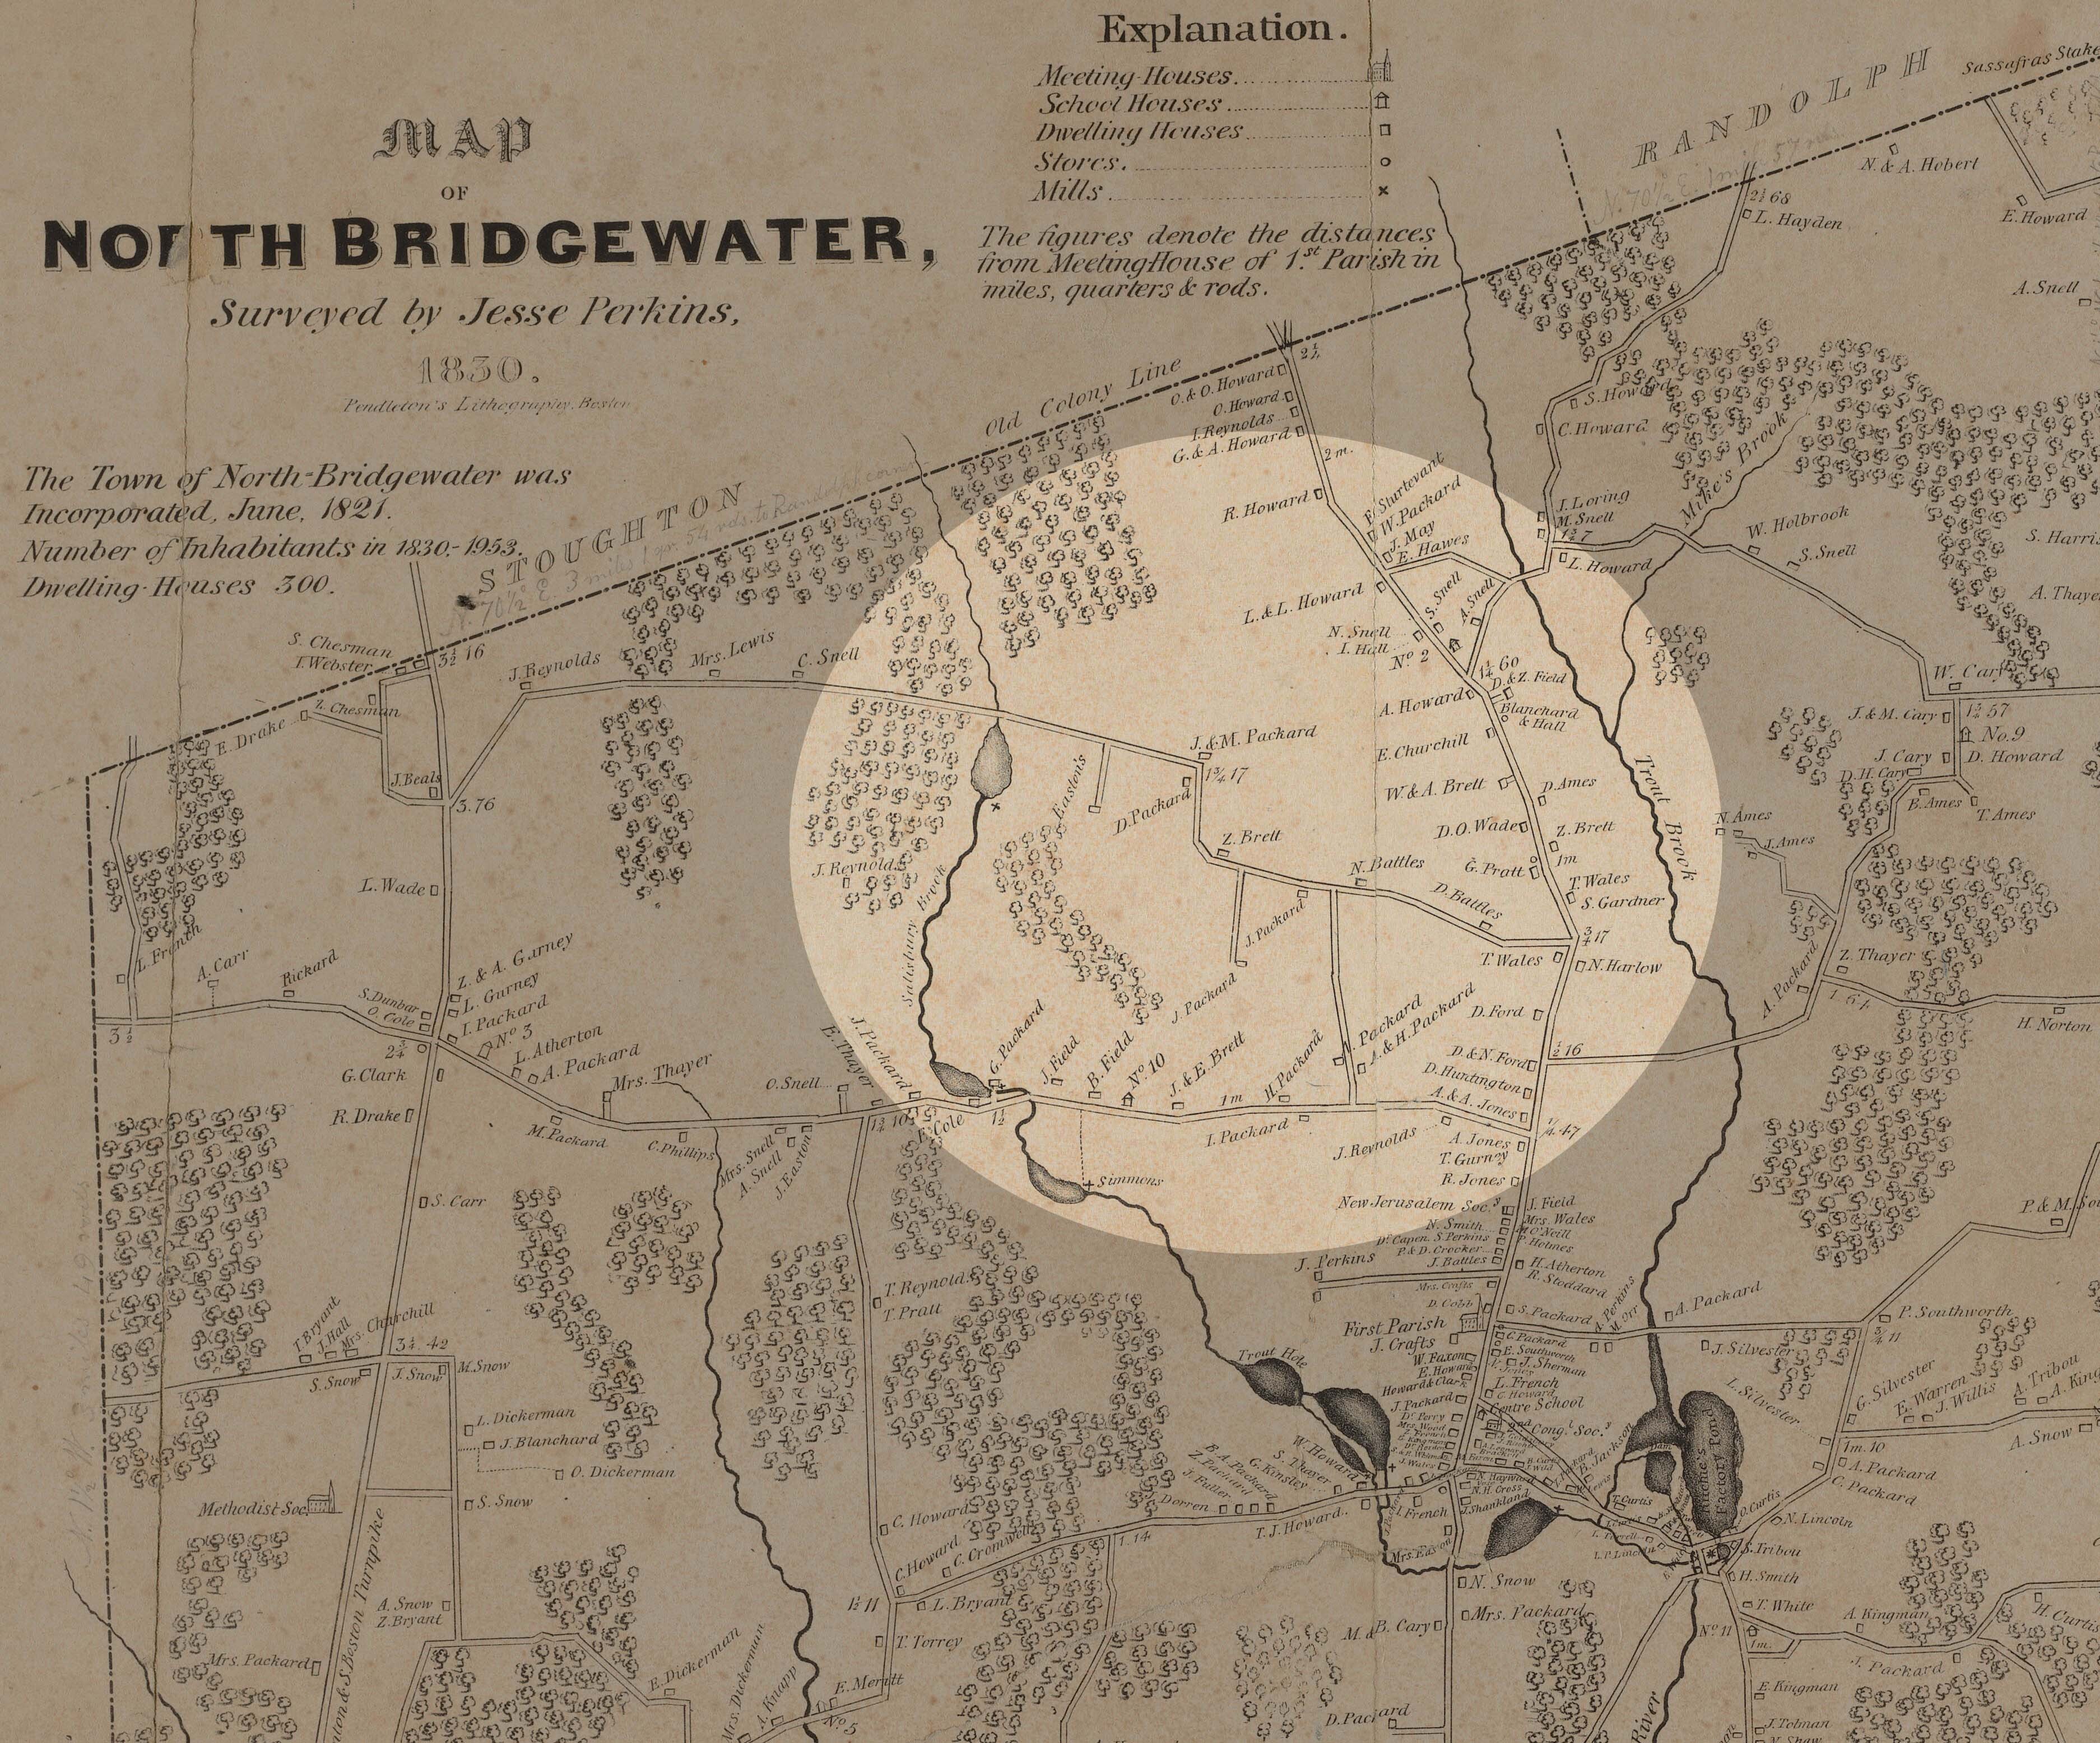 Map of North Bridgewater with a circular area highlighted in the middle.